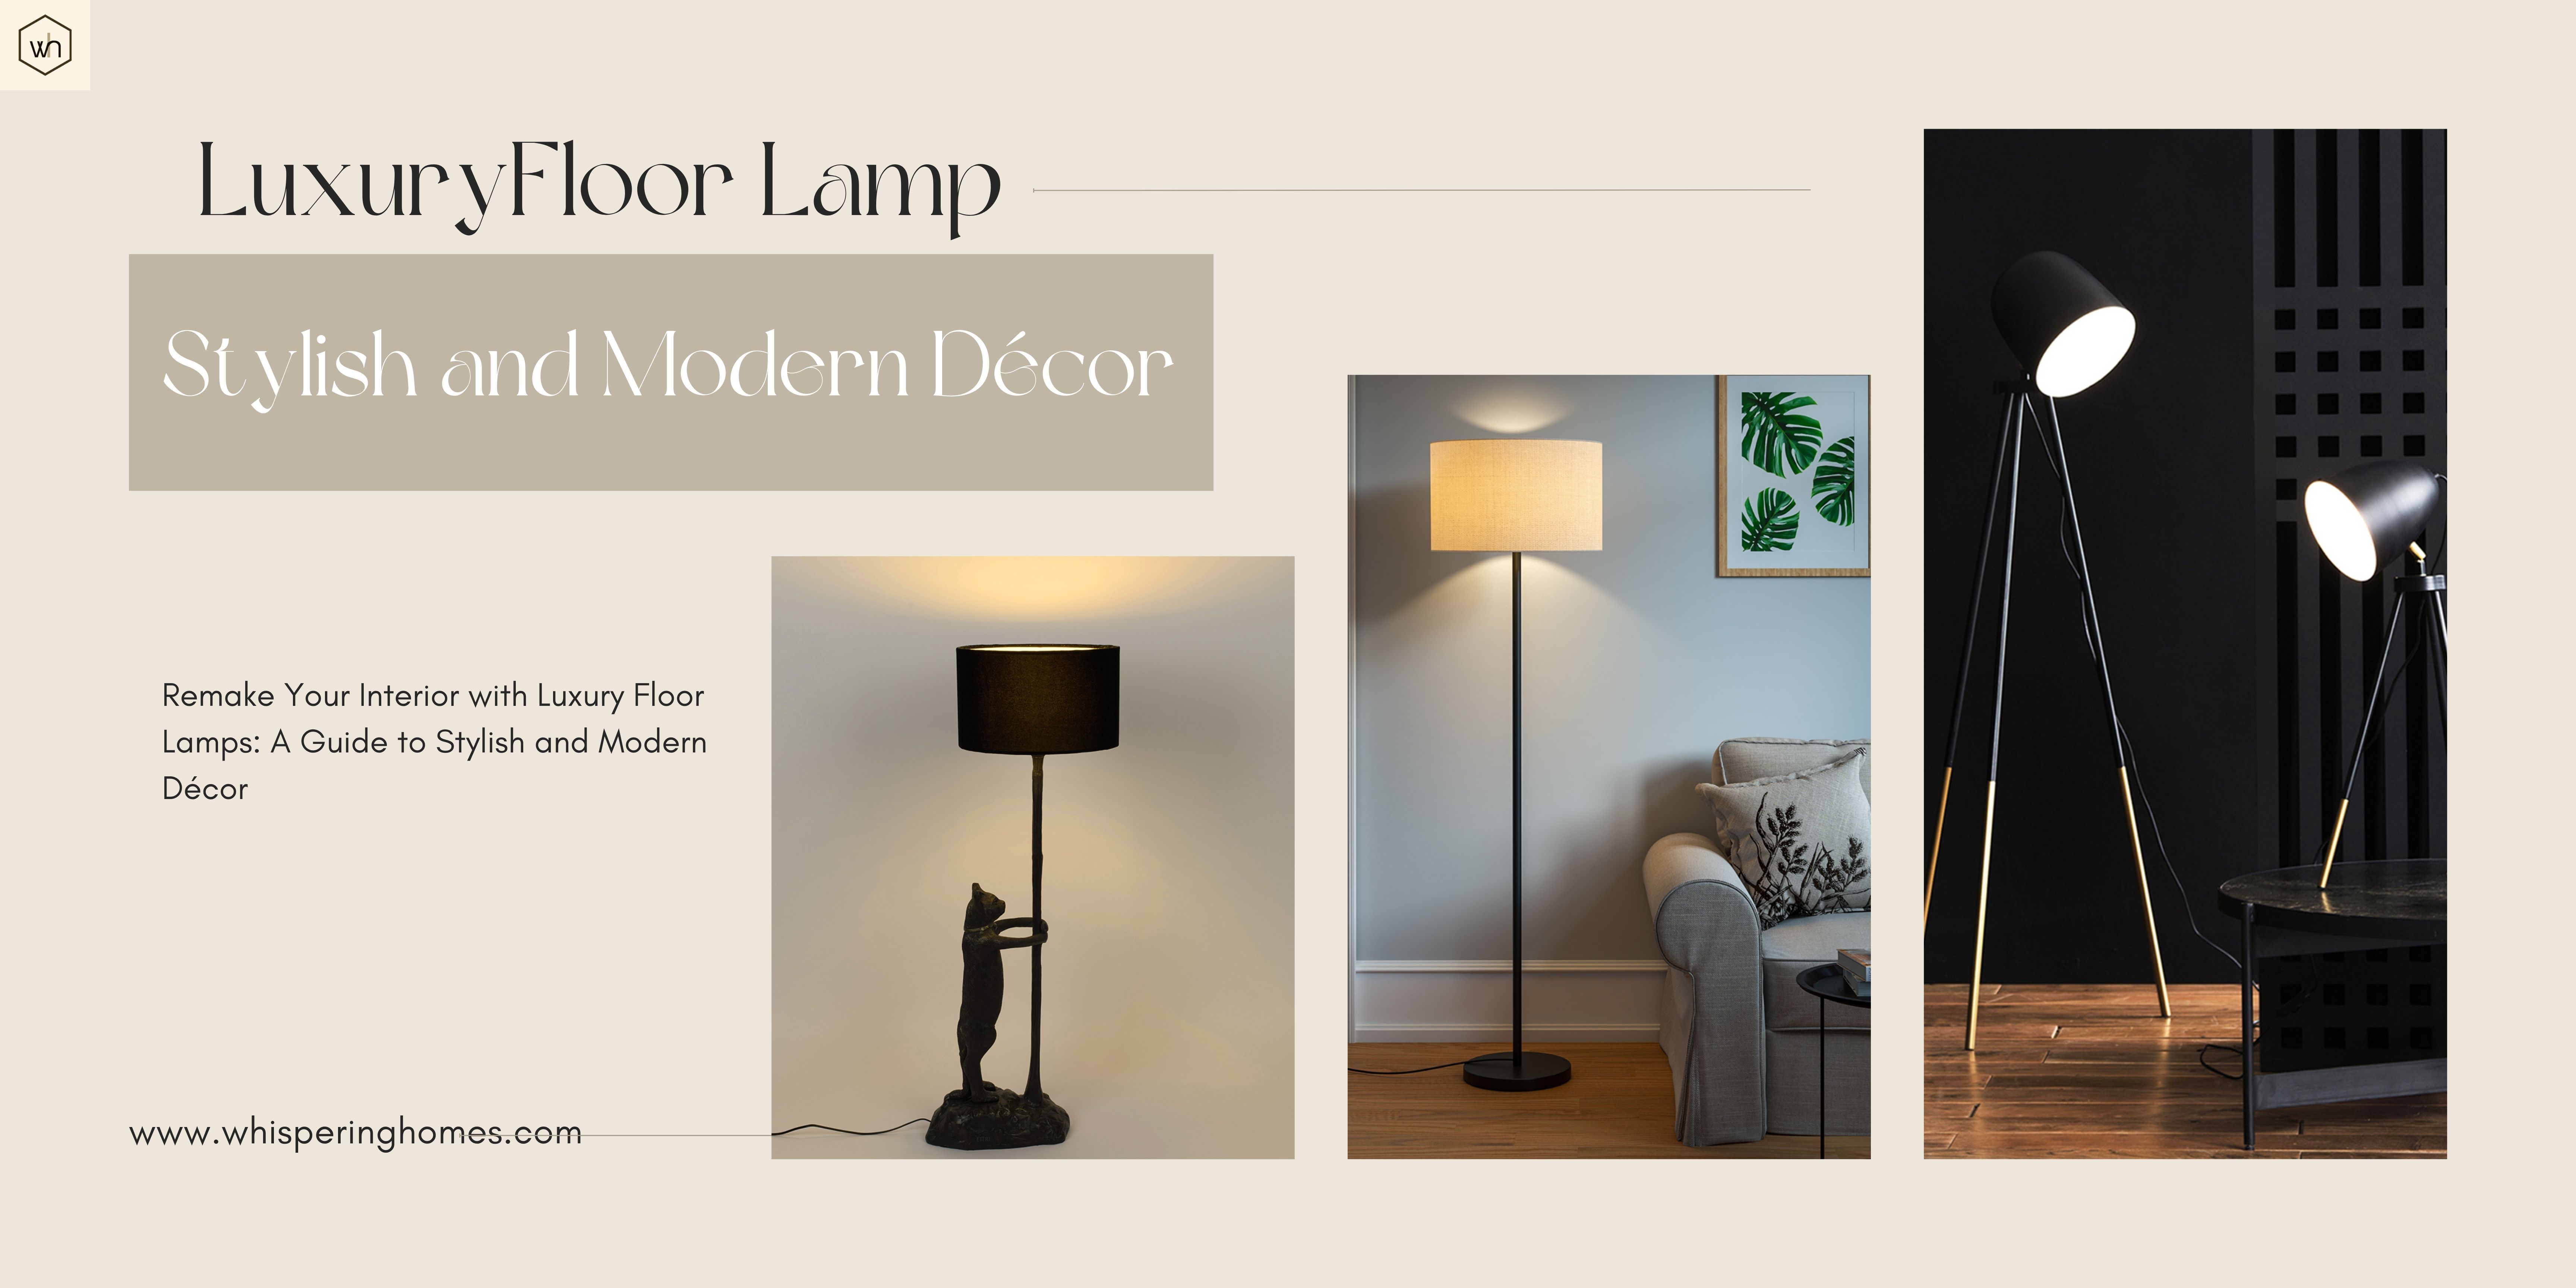 Remake Your Interior with Luxury Floor Lamps: A Guide to Stylish and Modern Décor